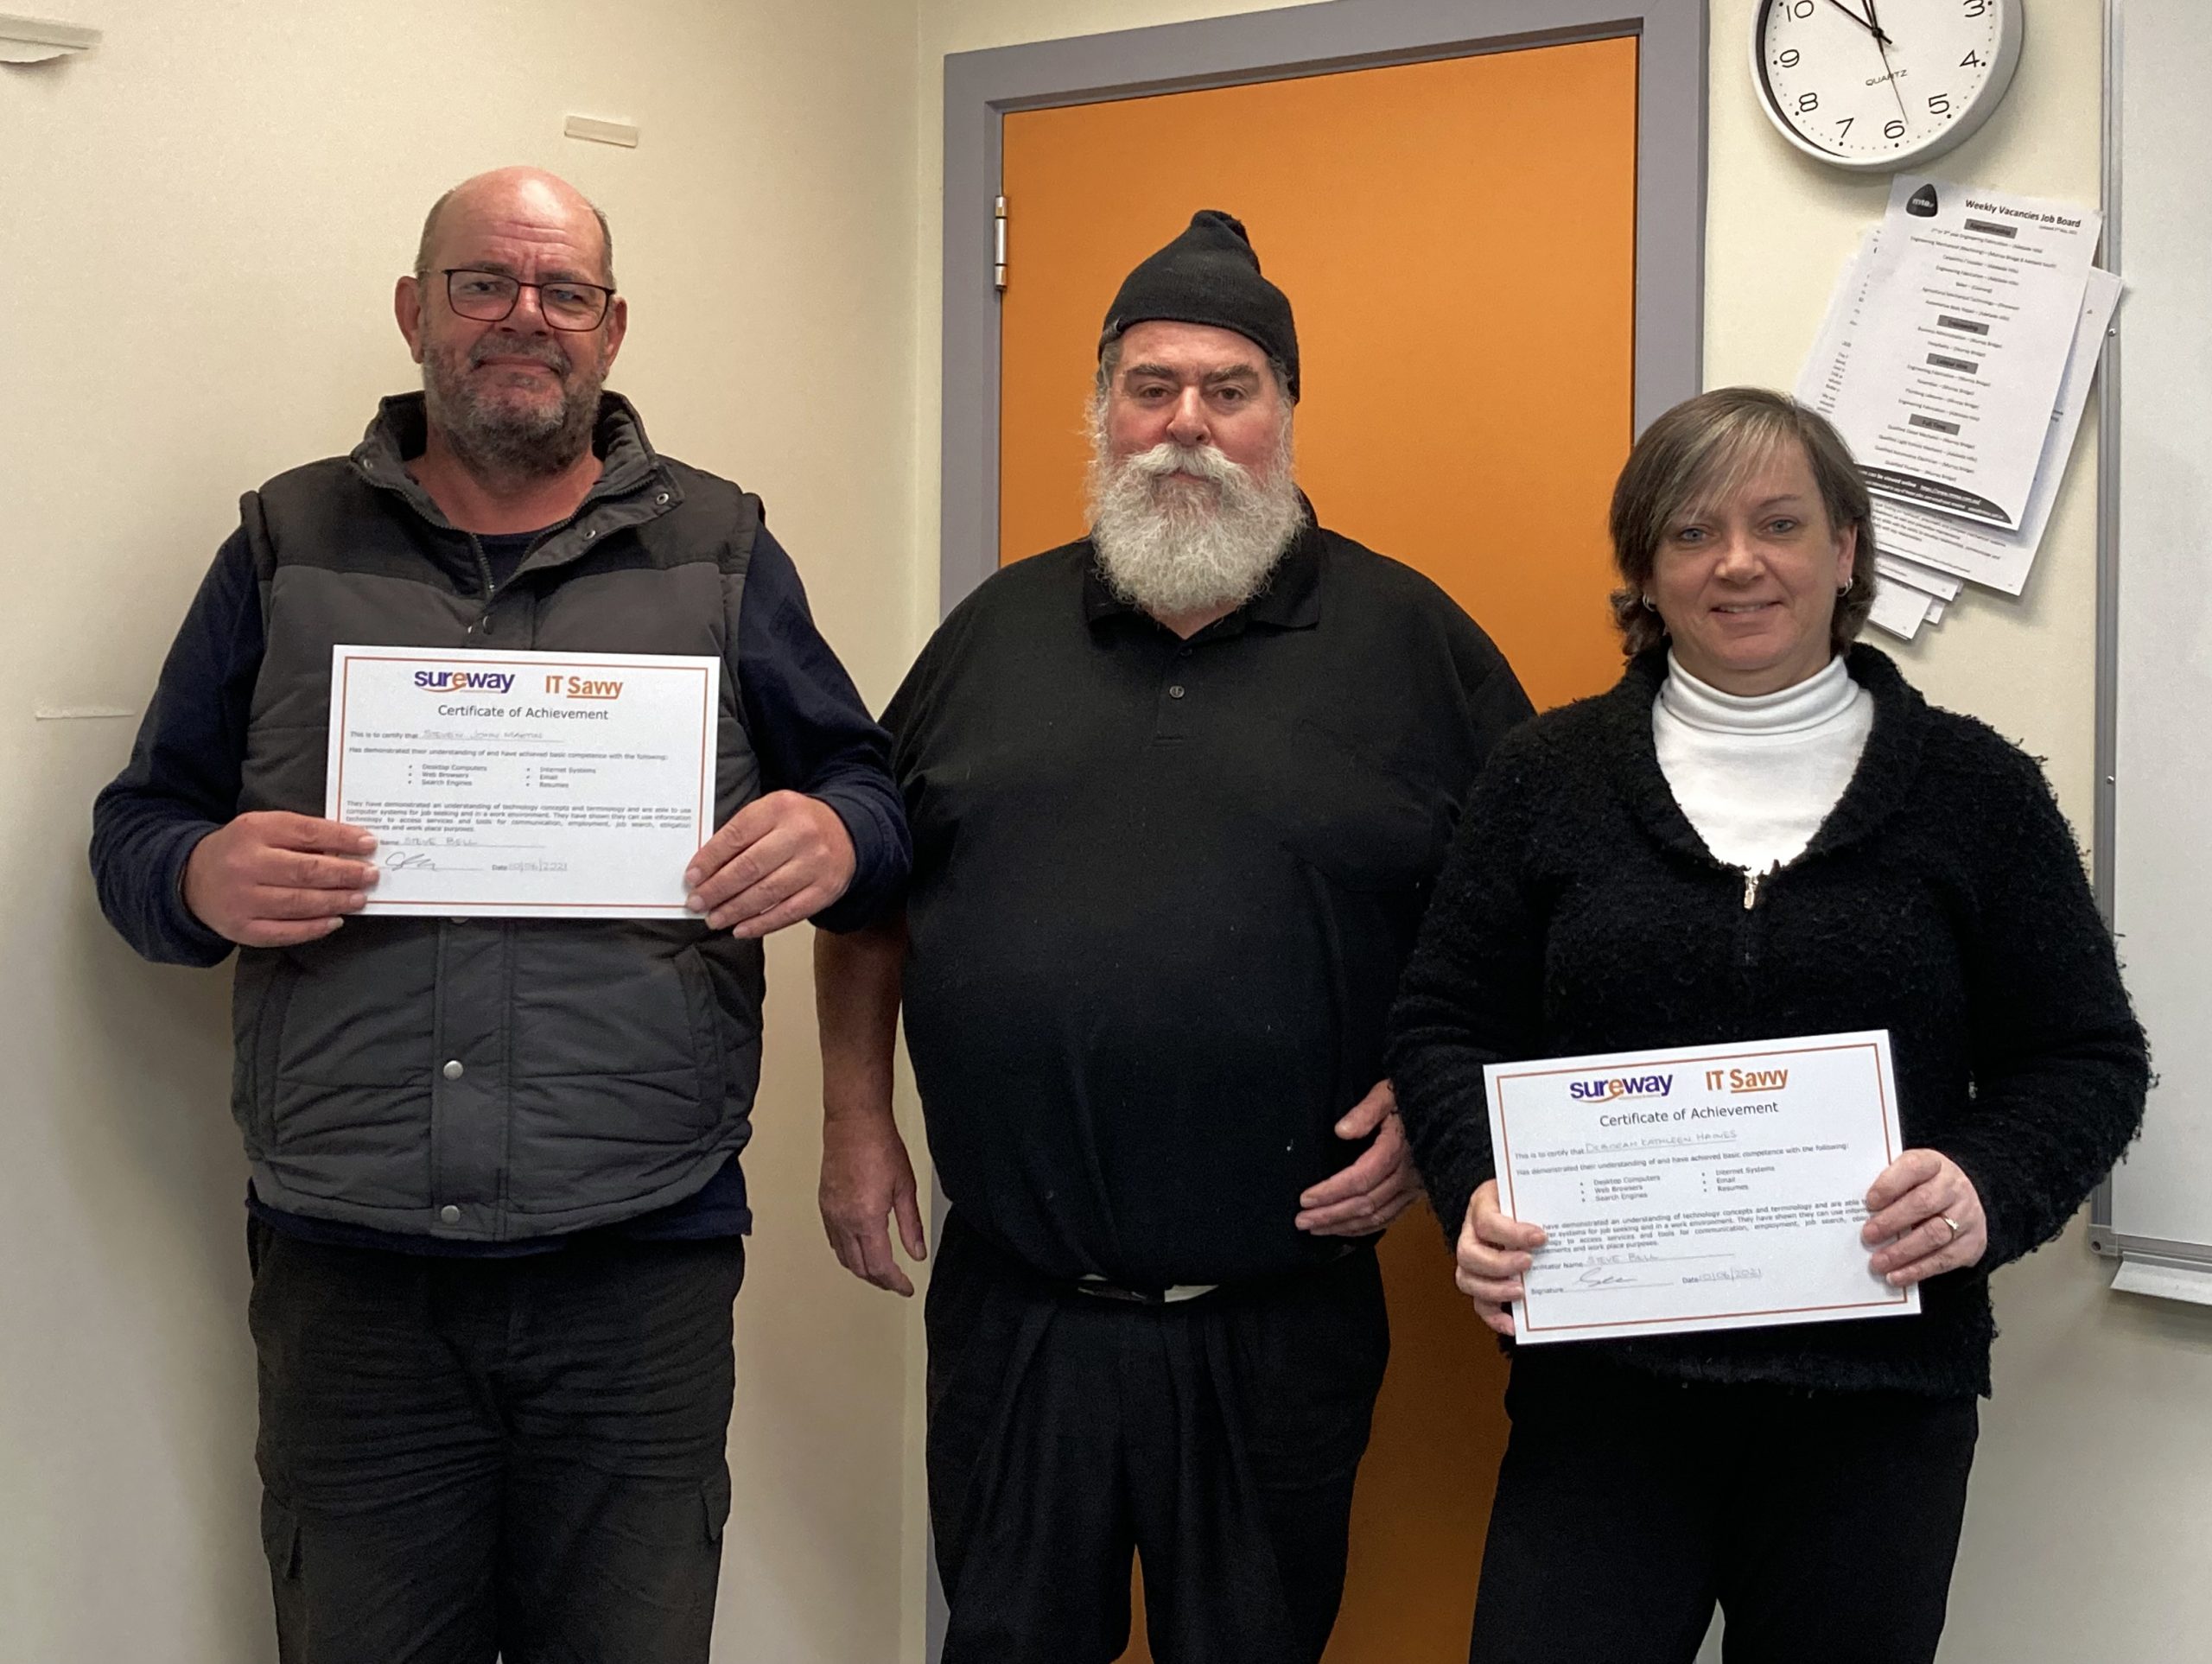 Three people smiling with certificates after completing the course